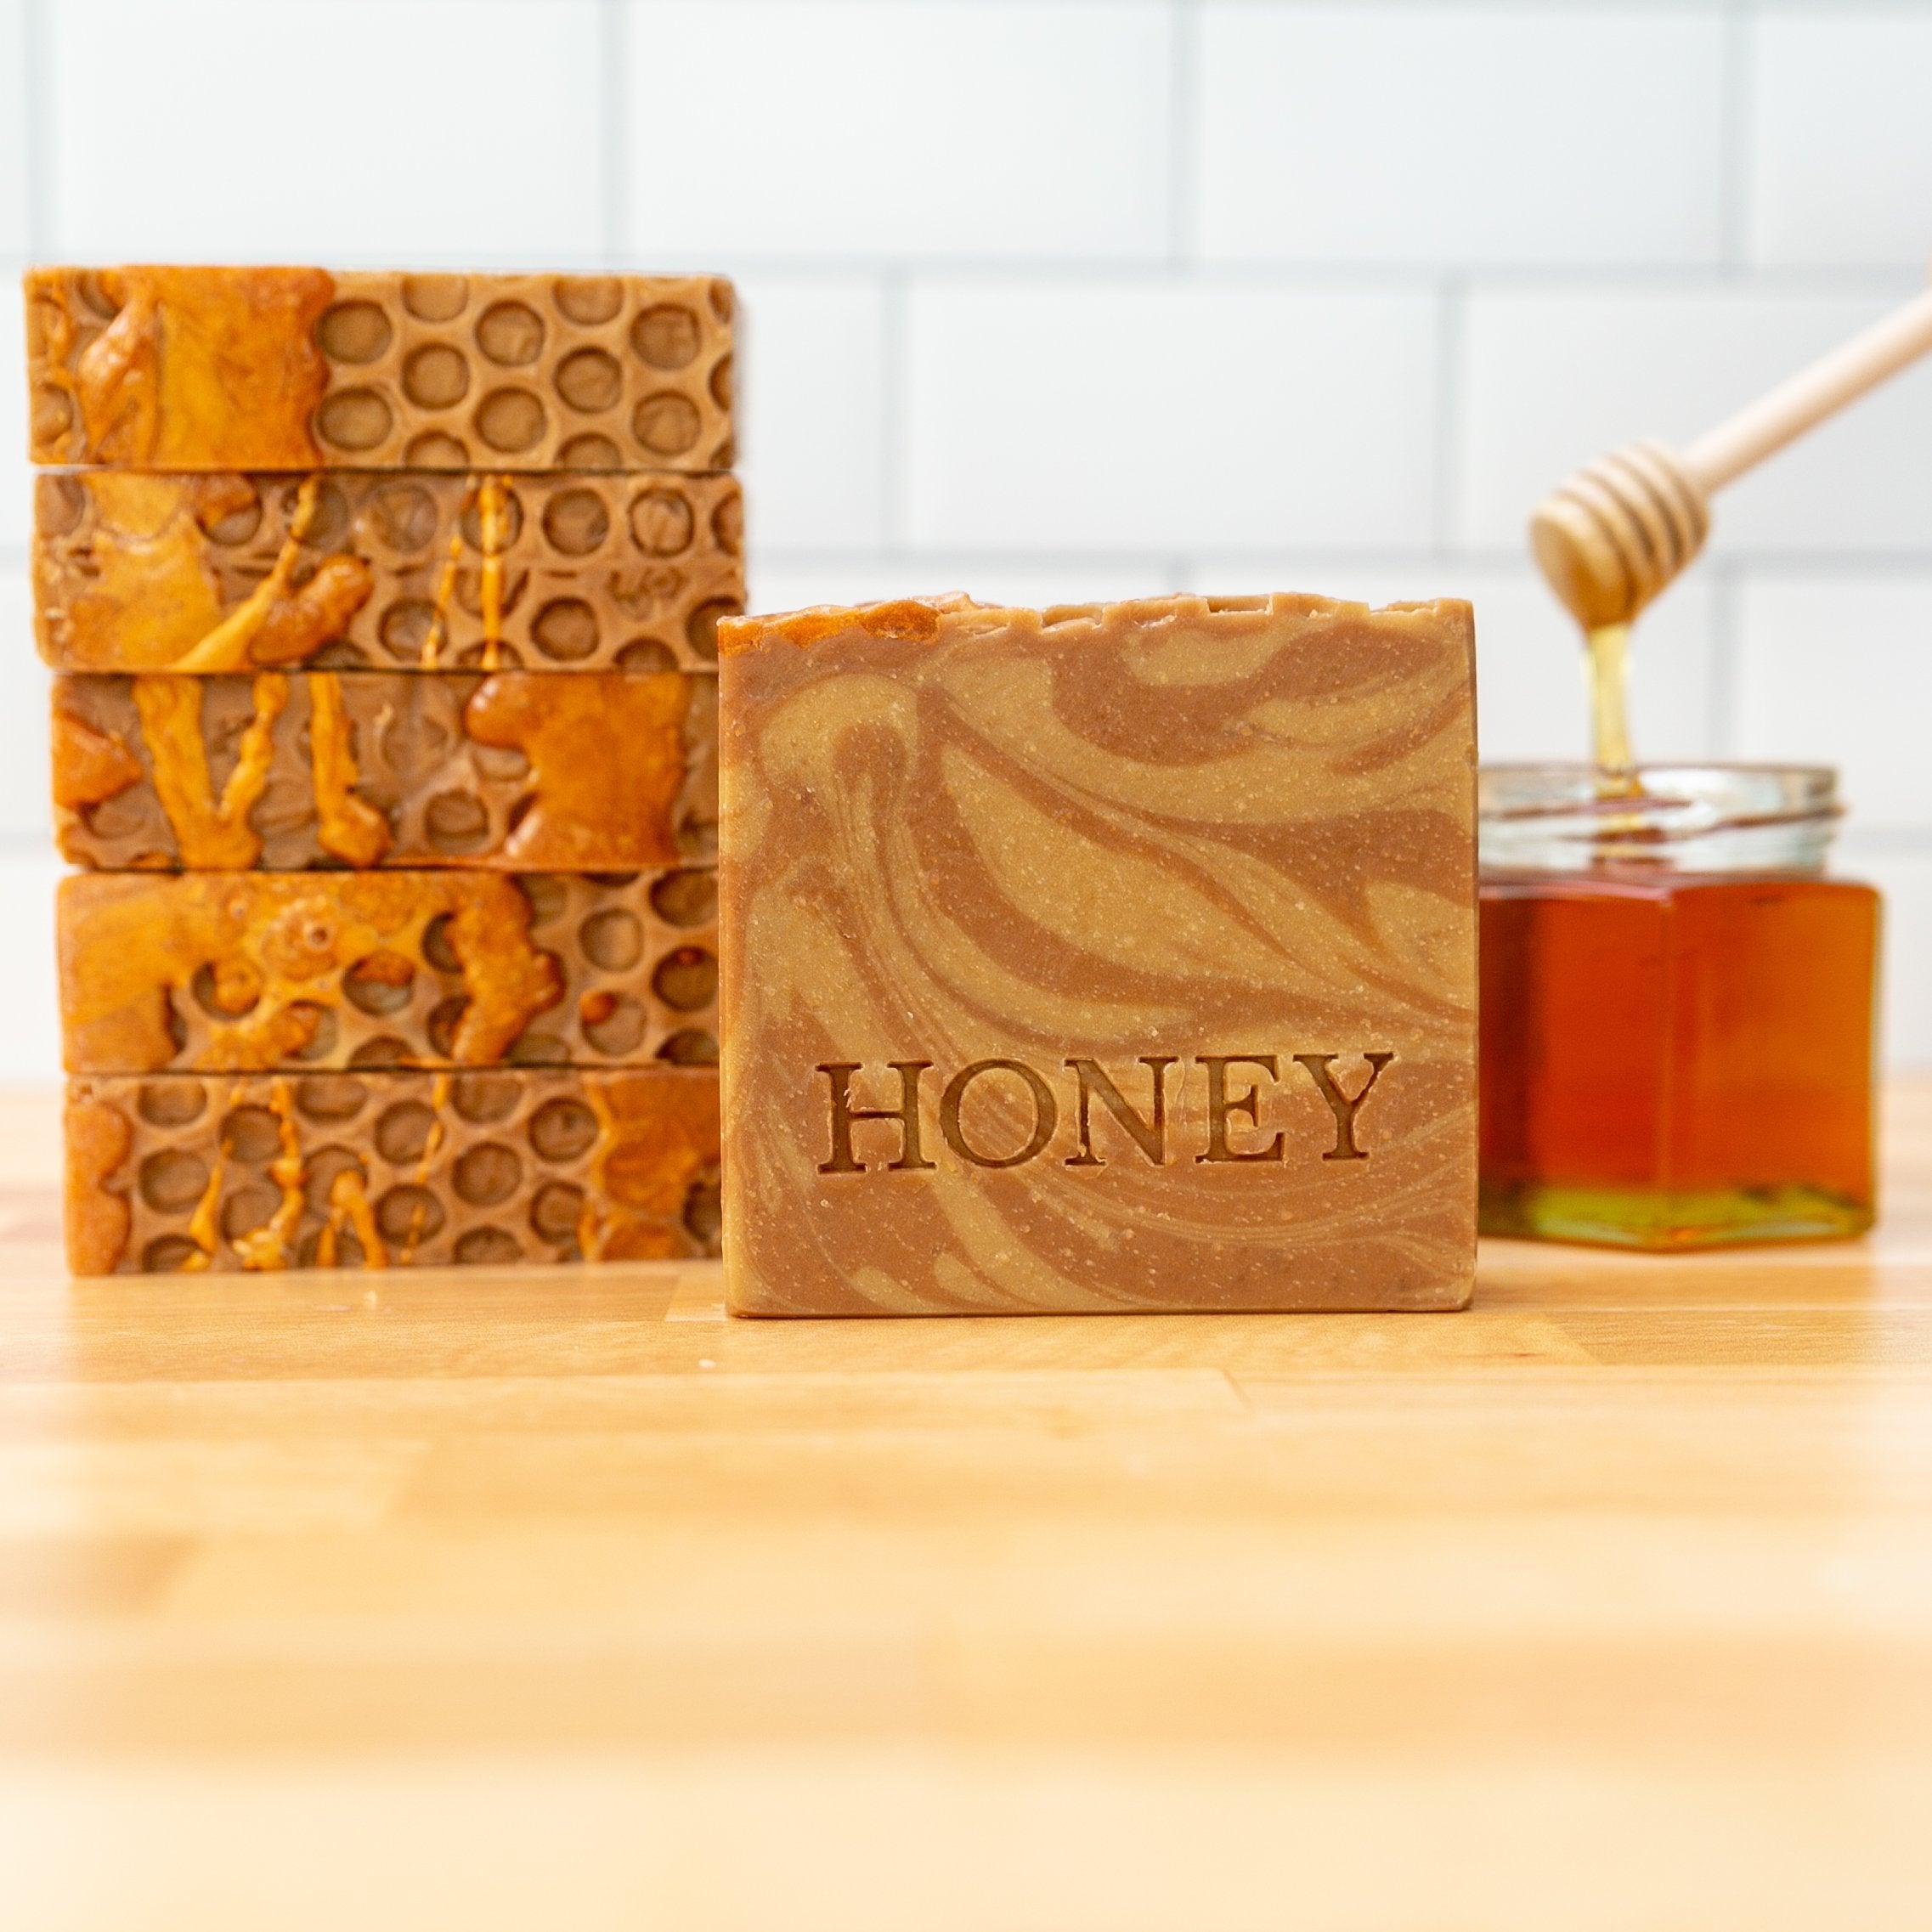 A bar of soap made with honey